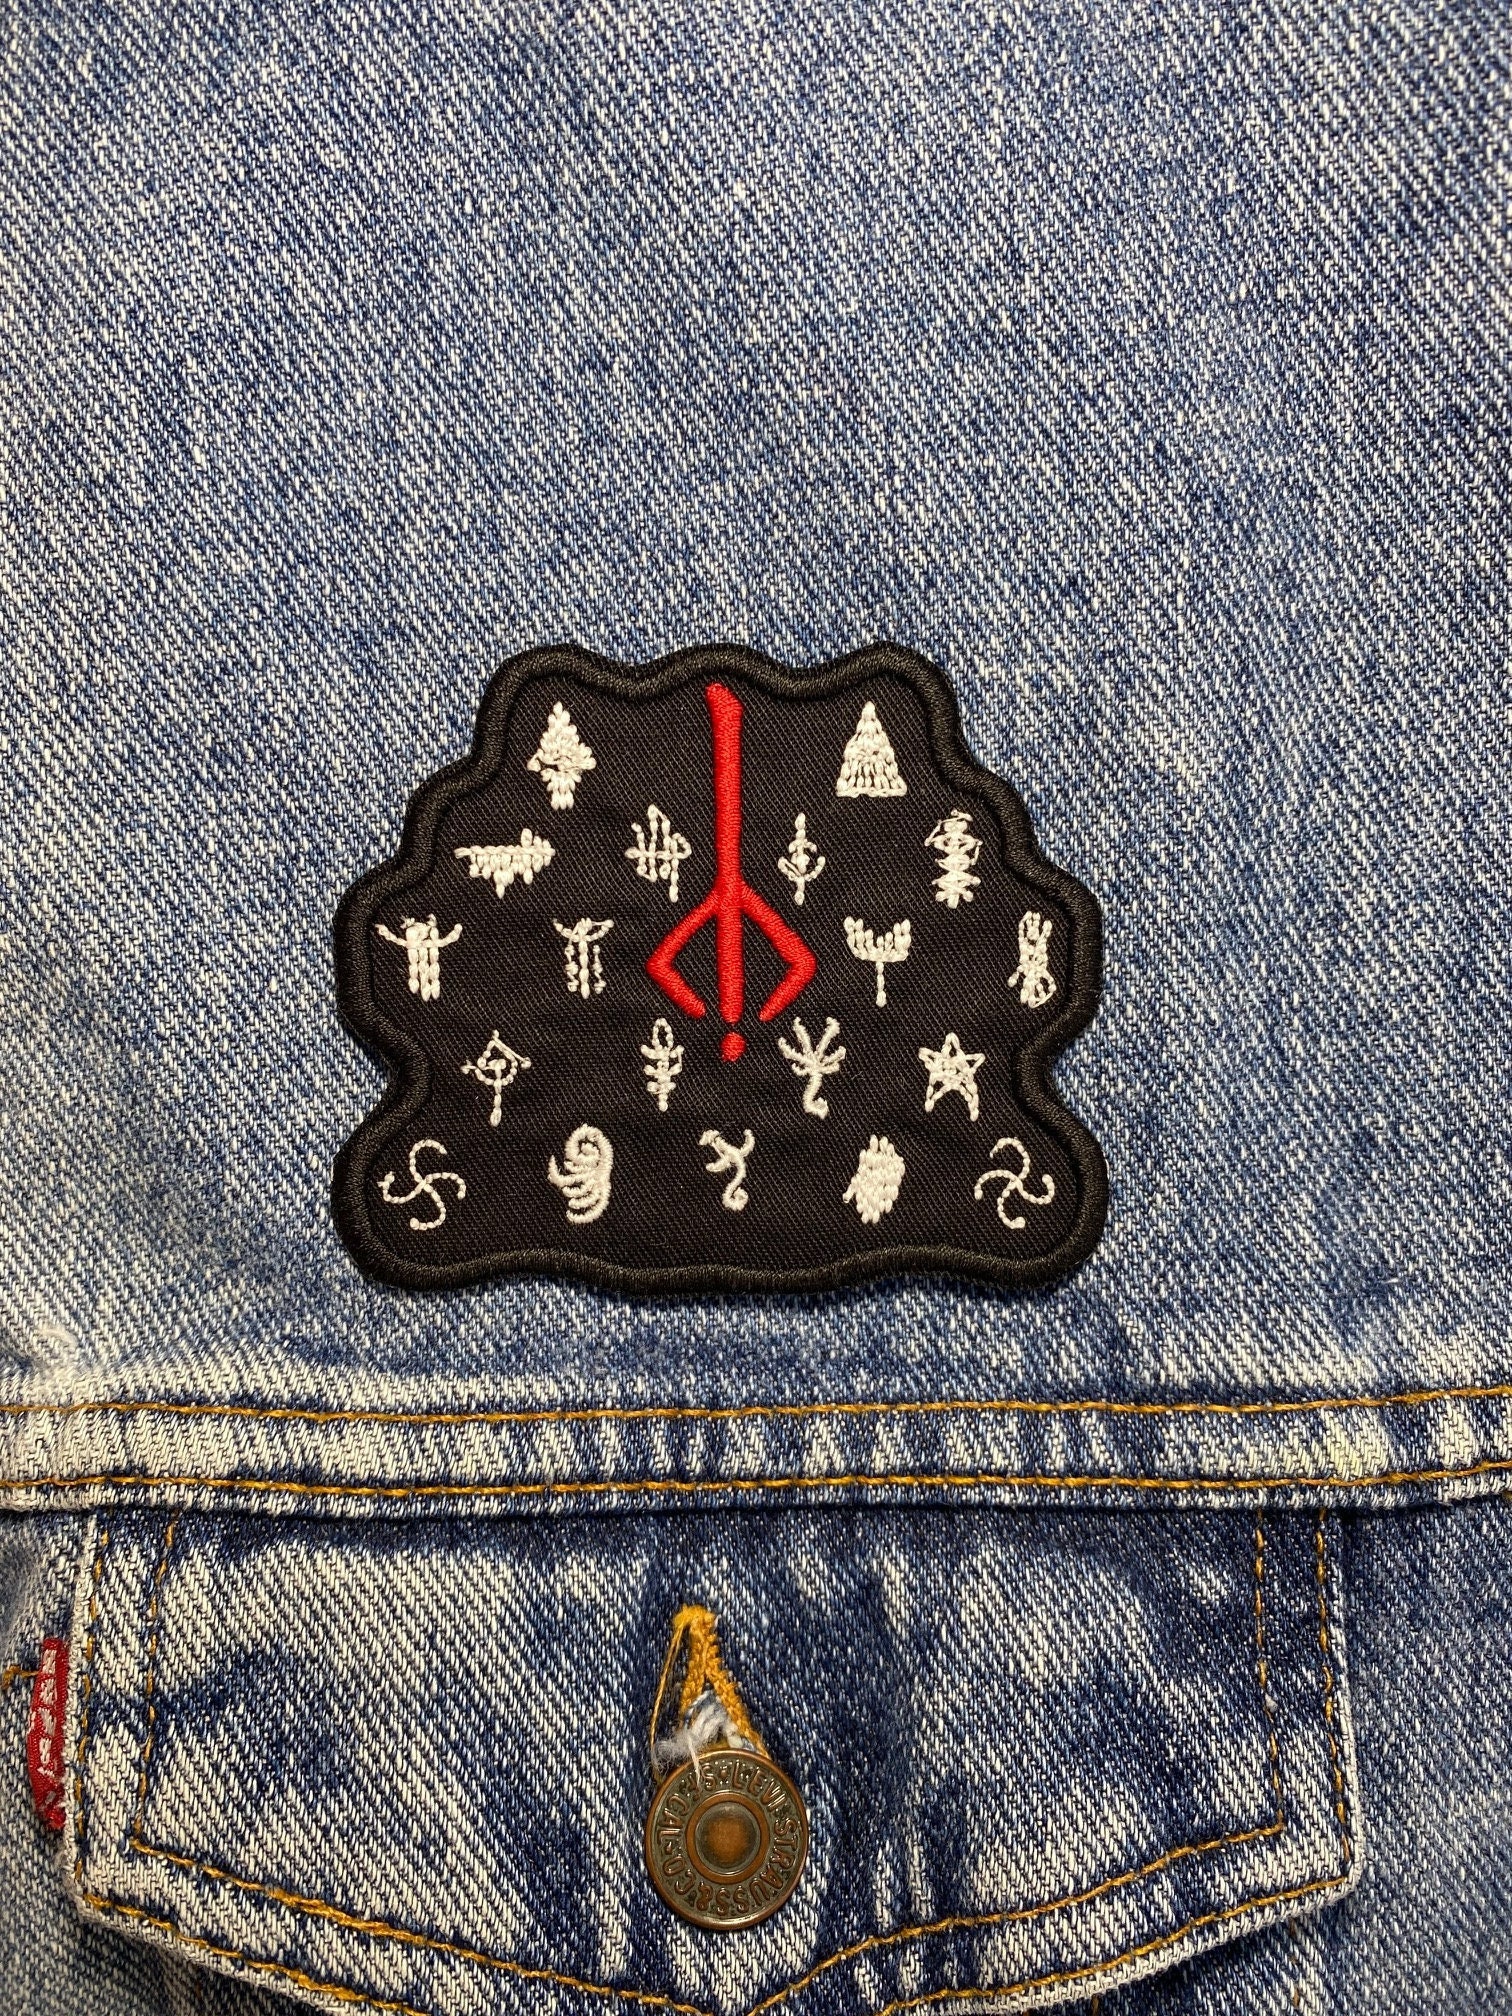 Hunter's Mark Embroidered Patch. Horror Movie/video Game Inspired Patches.  Iron on Backing. 